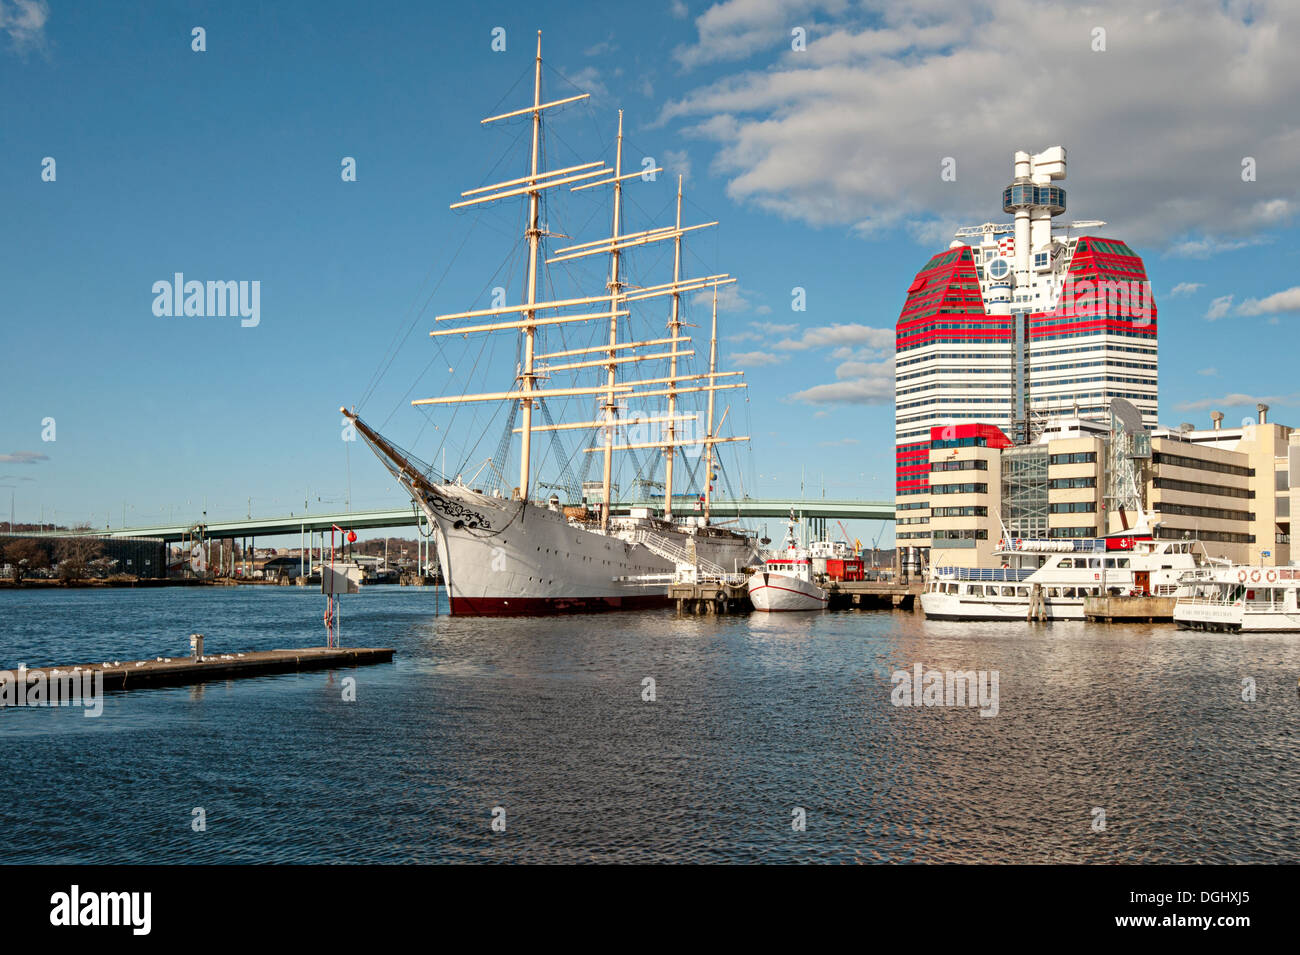 A big vessel in a harbor in Sweden. Sunny day Stock Photo